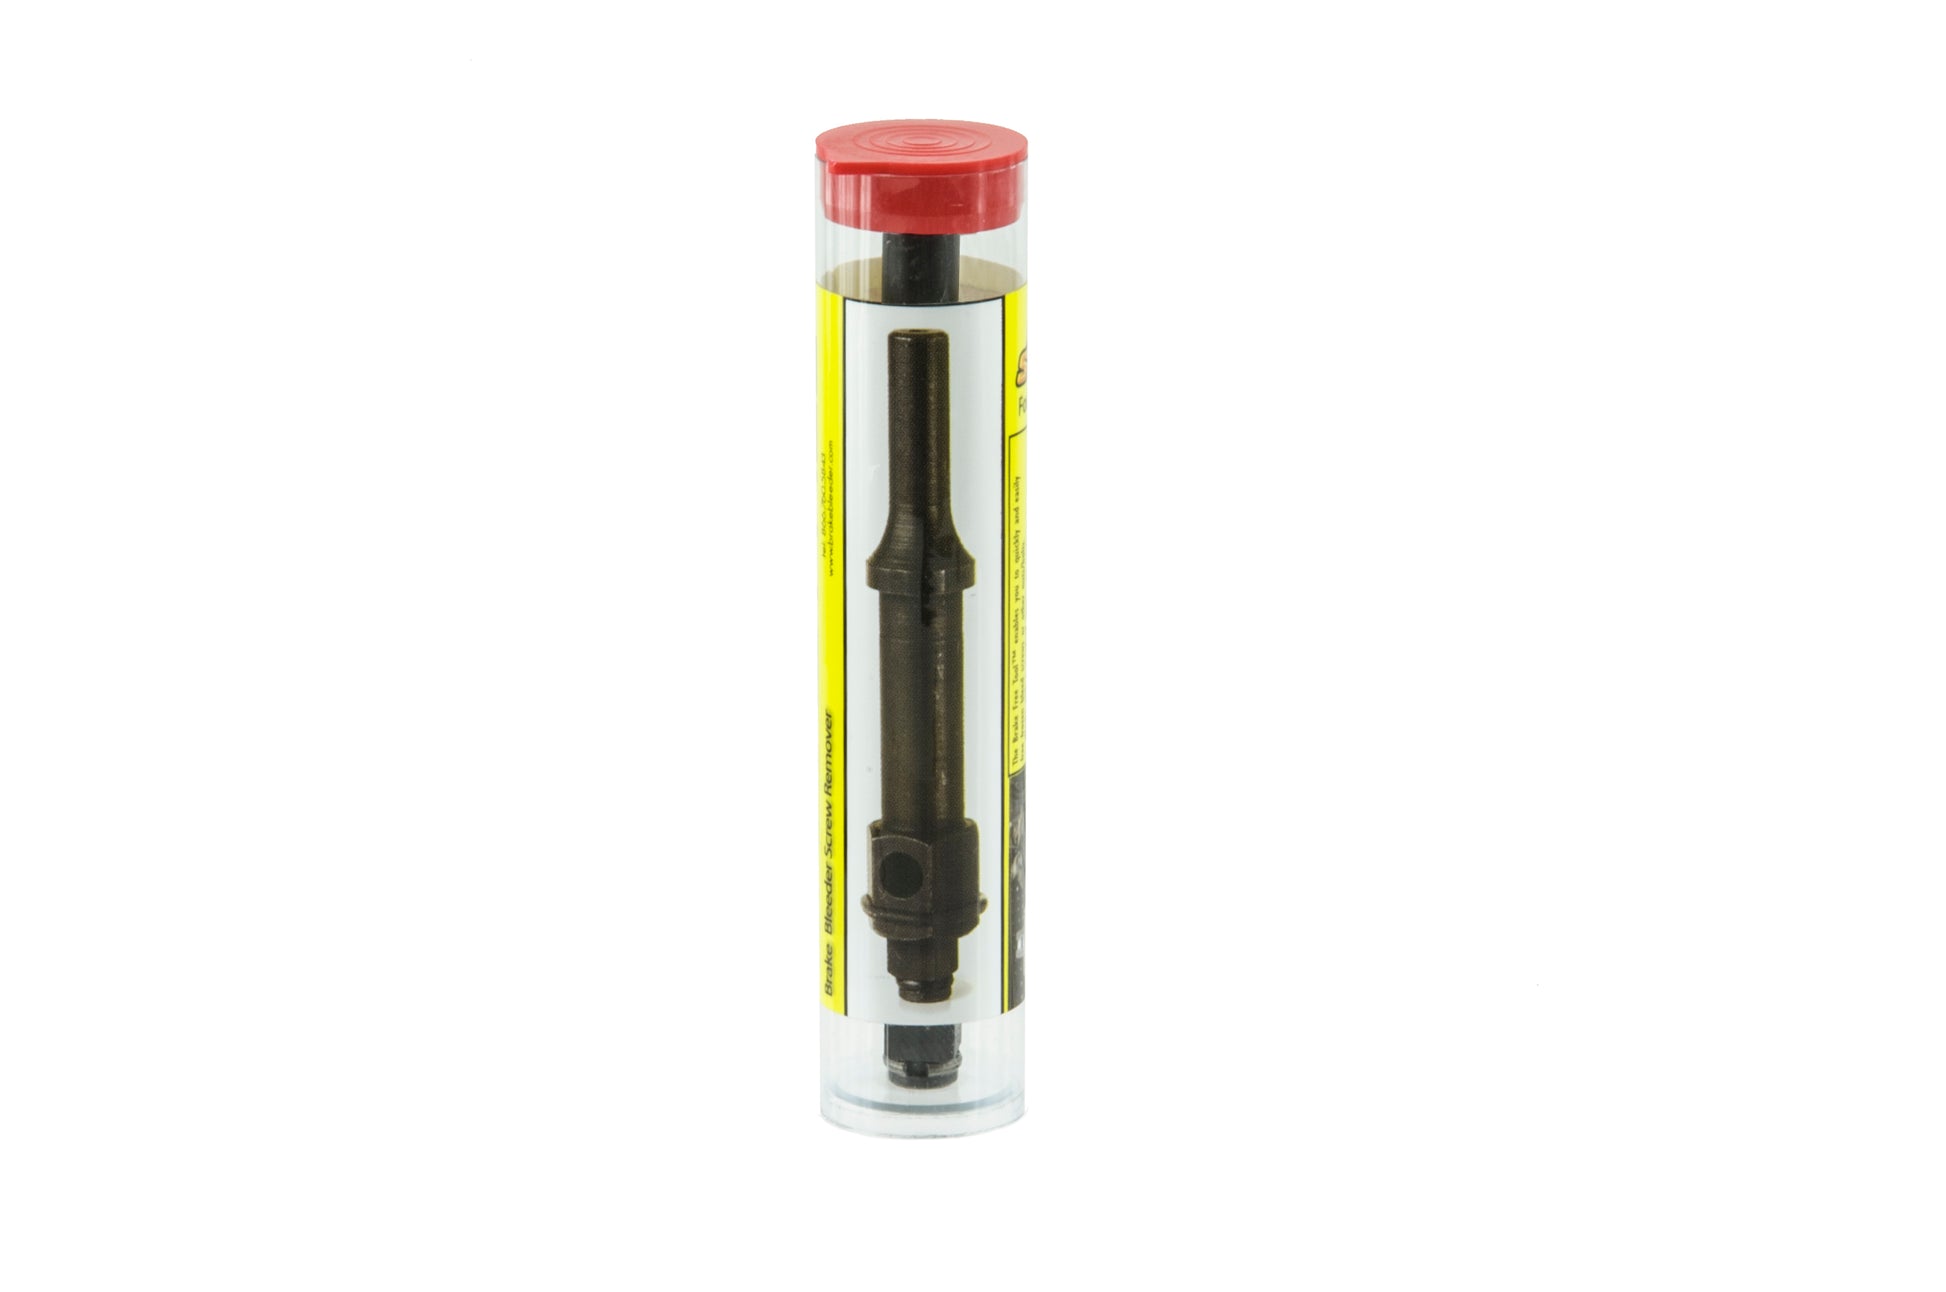 a tool called a brake bleed screw remover. It is a small, black metal tool that is used to remove stripped or damaged brake bleed screws from calipers. The tool has a plunger with a hole in the center that fits over the damaged screw. A screw in the handle of the tool tightens a collet, which expands the plunger and grips the damaged screw. Once the screw is gripped, it can be turned out of the caliper.